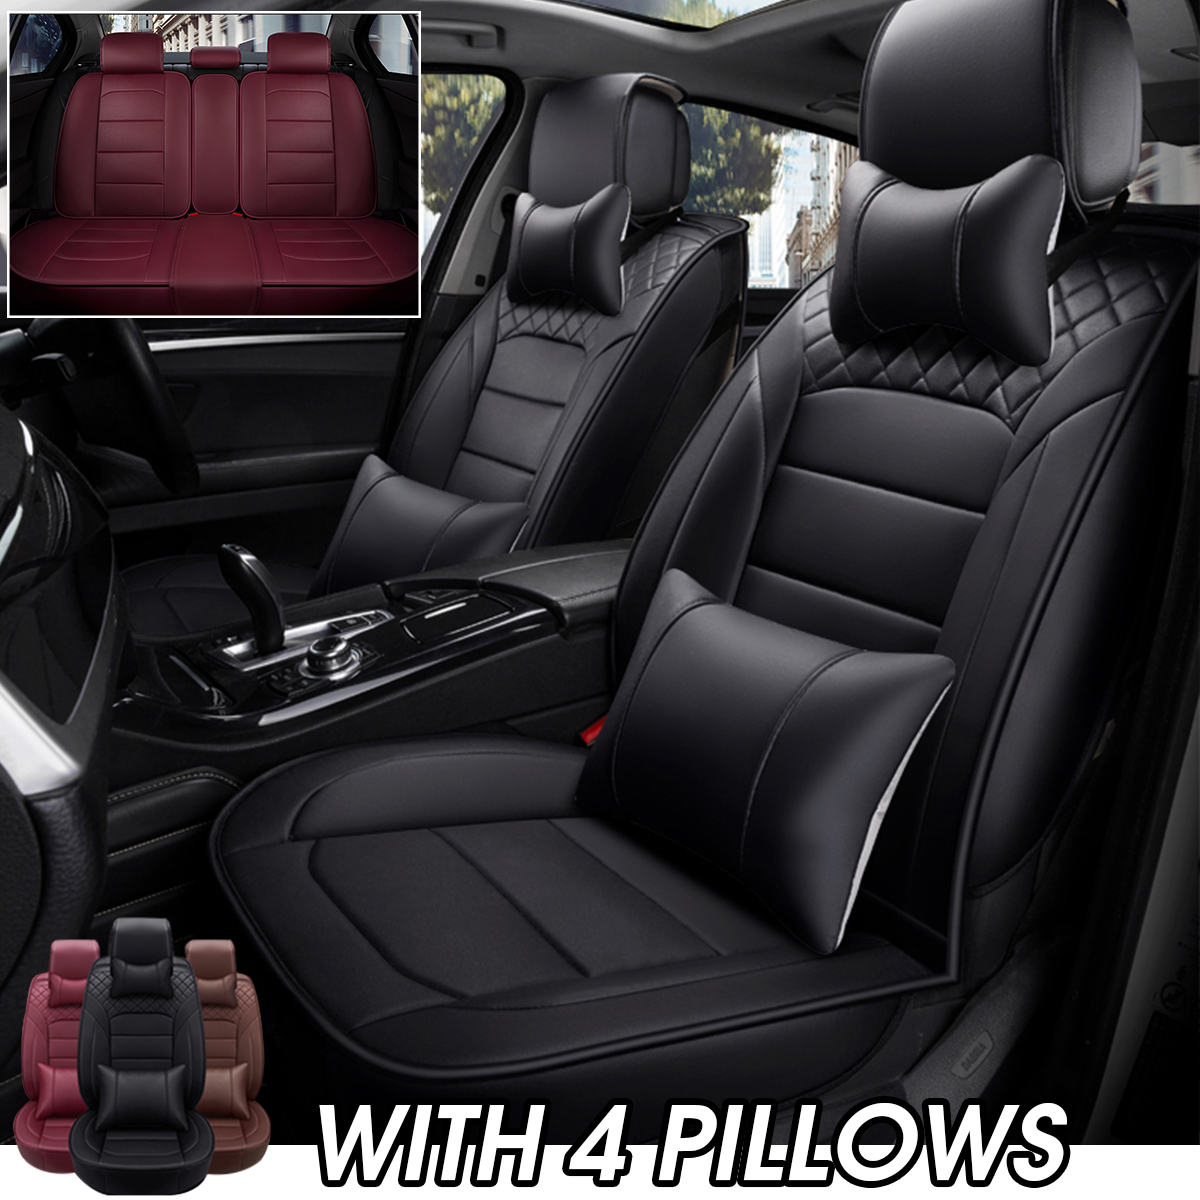 5D Full Surrounded PU Leather Seat Cover Cushion For Car Interior Accessories